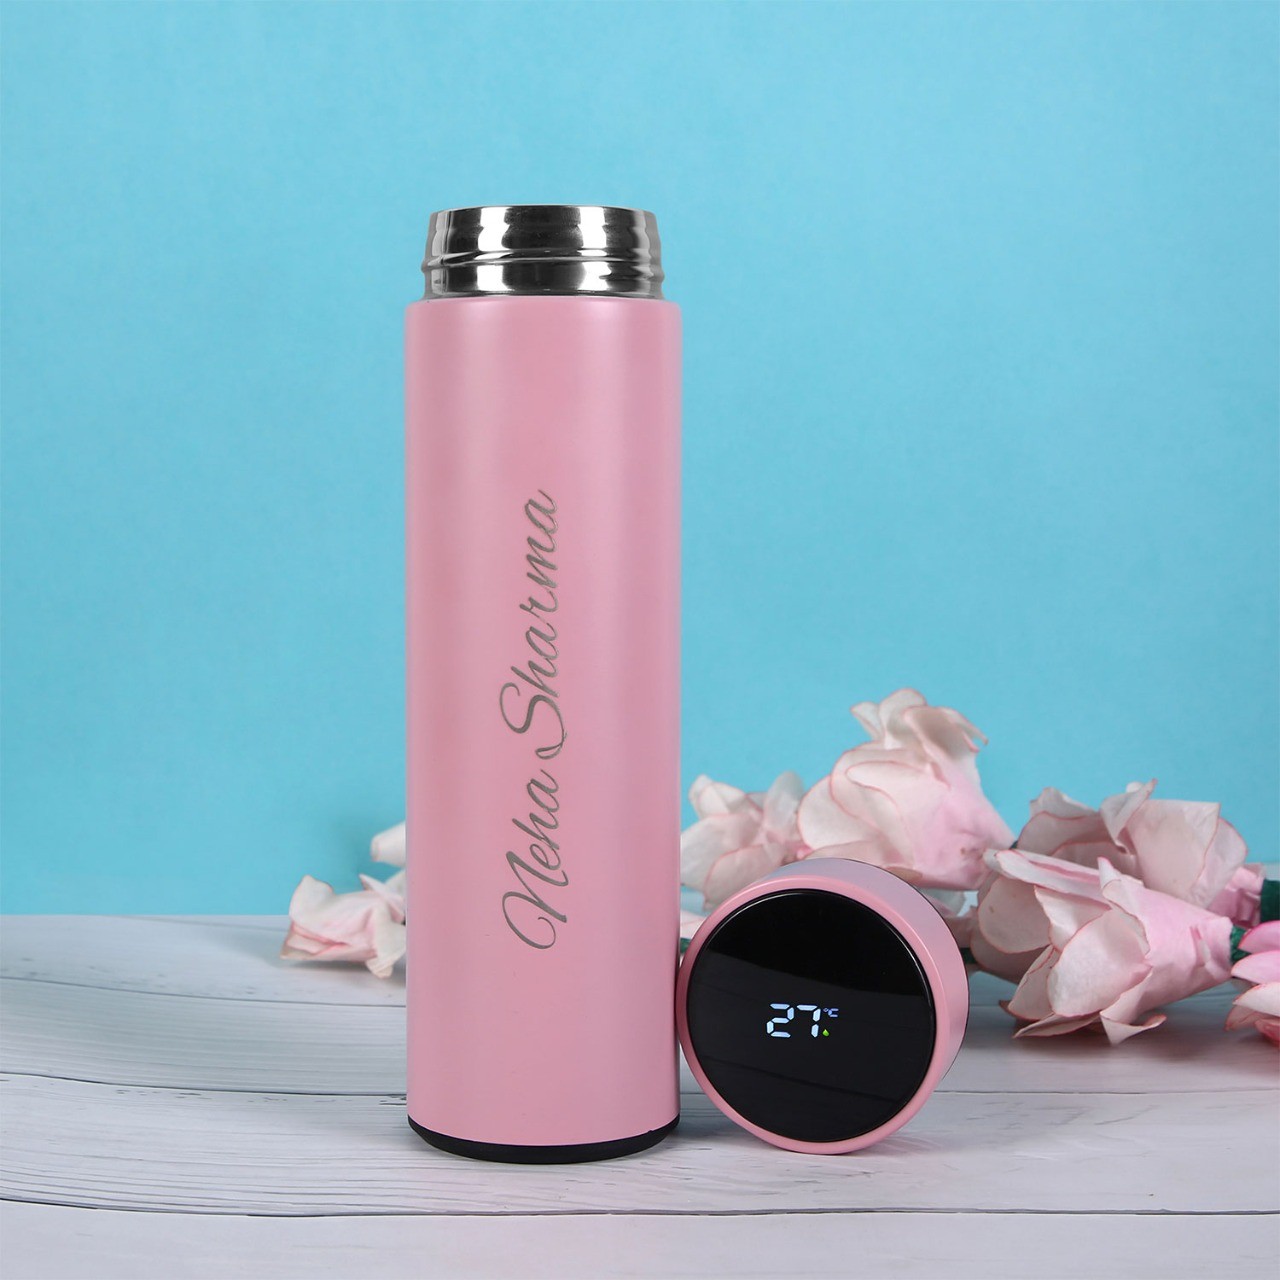 Personalized Water Bottle With LED Temperature Display